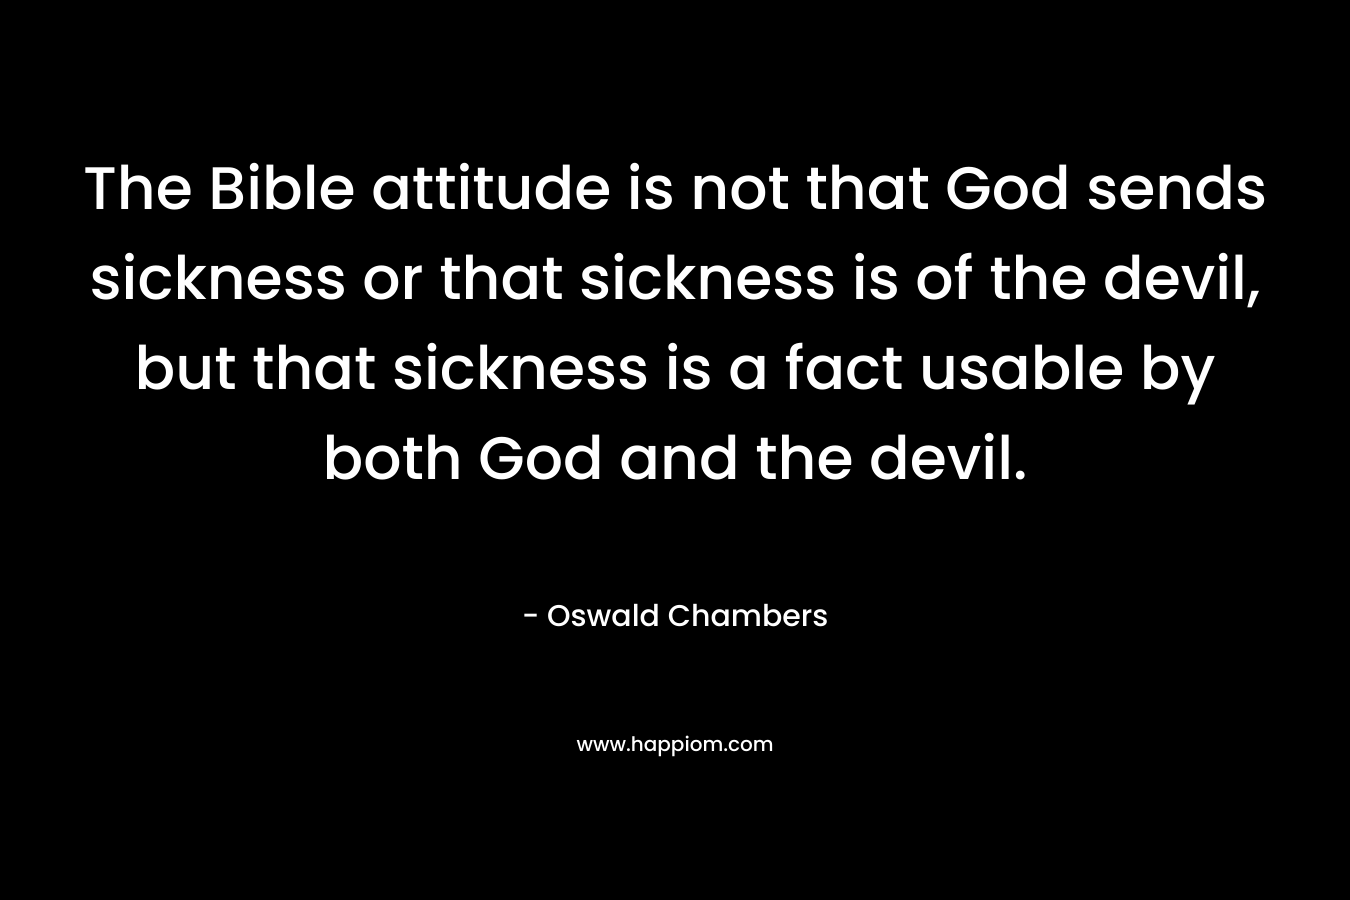 The Bible attitude is not that God sends sickness or that sickness is of the devil, but that sickness is a fact usable by both God and the devil.